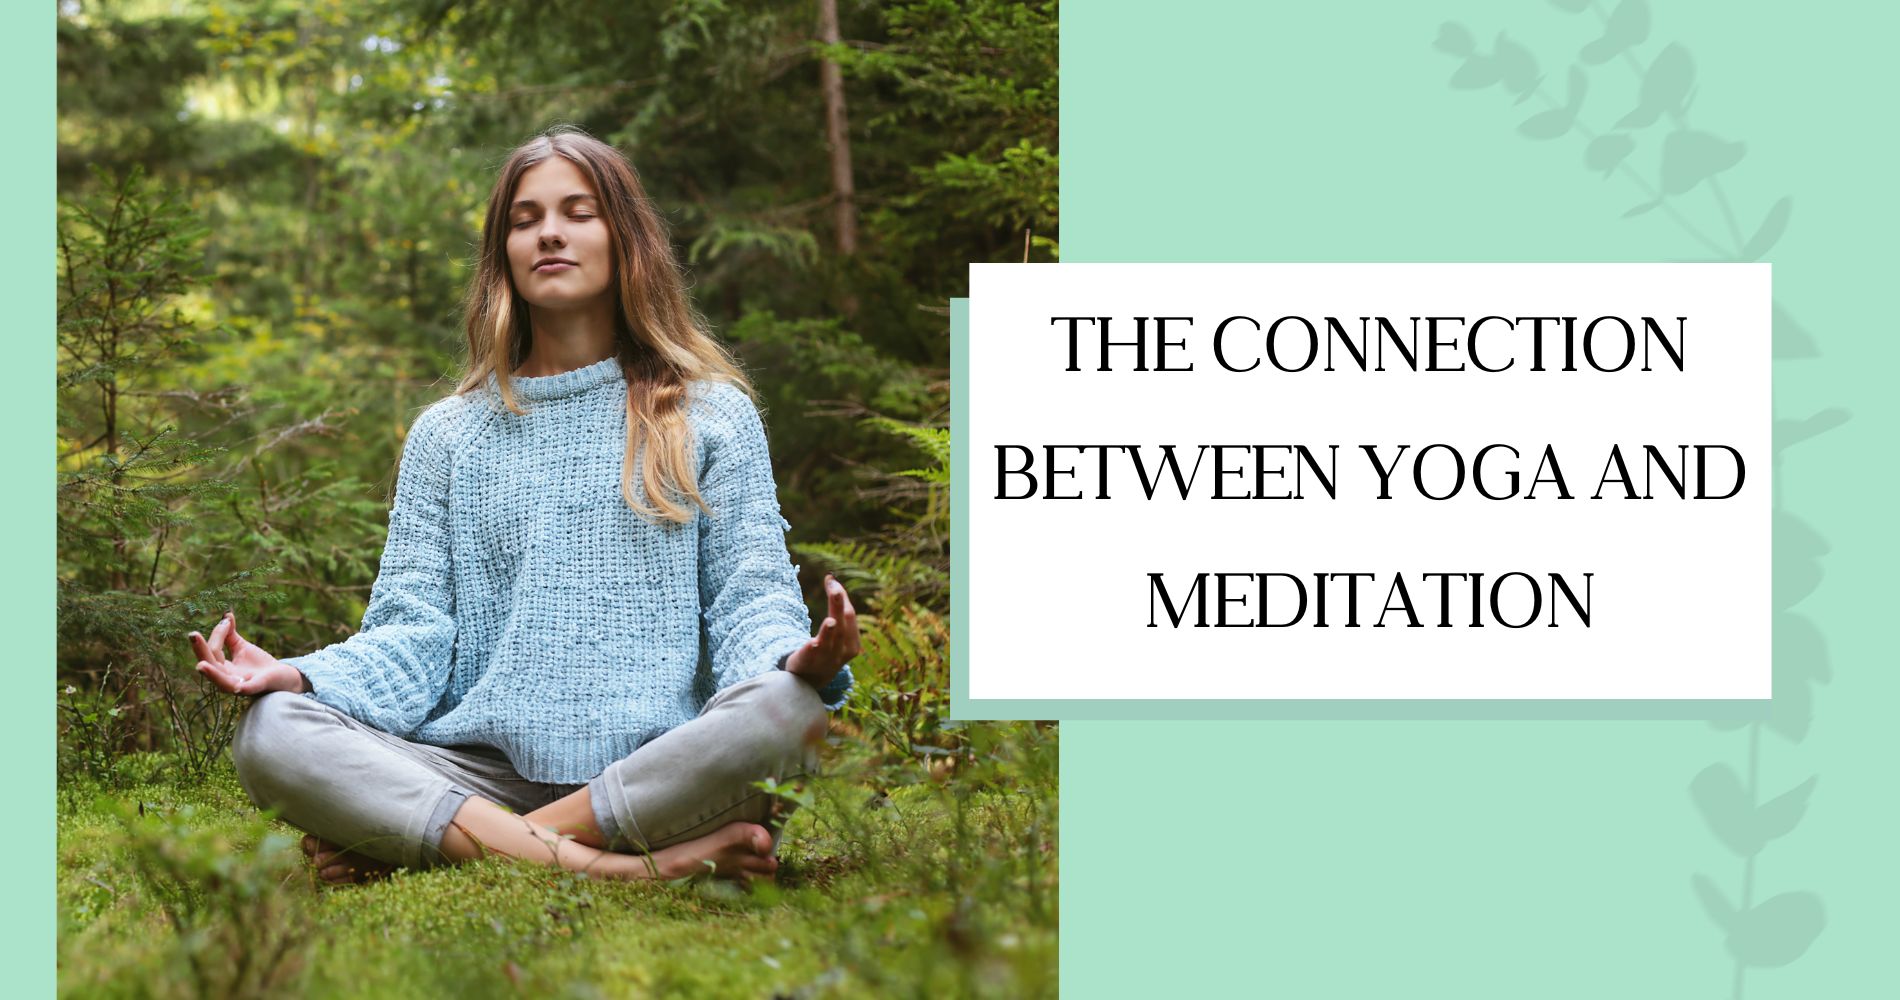 The Connection Between Yoga and Meditation